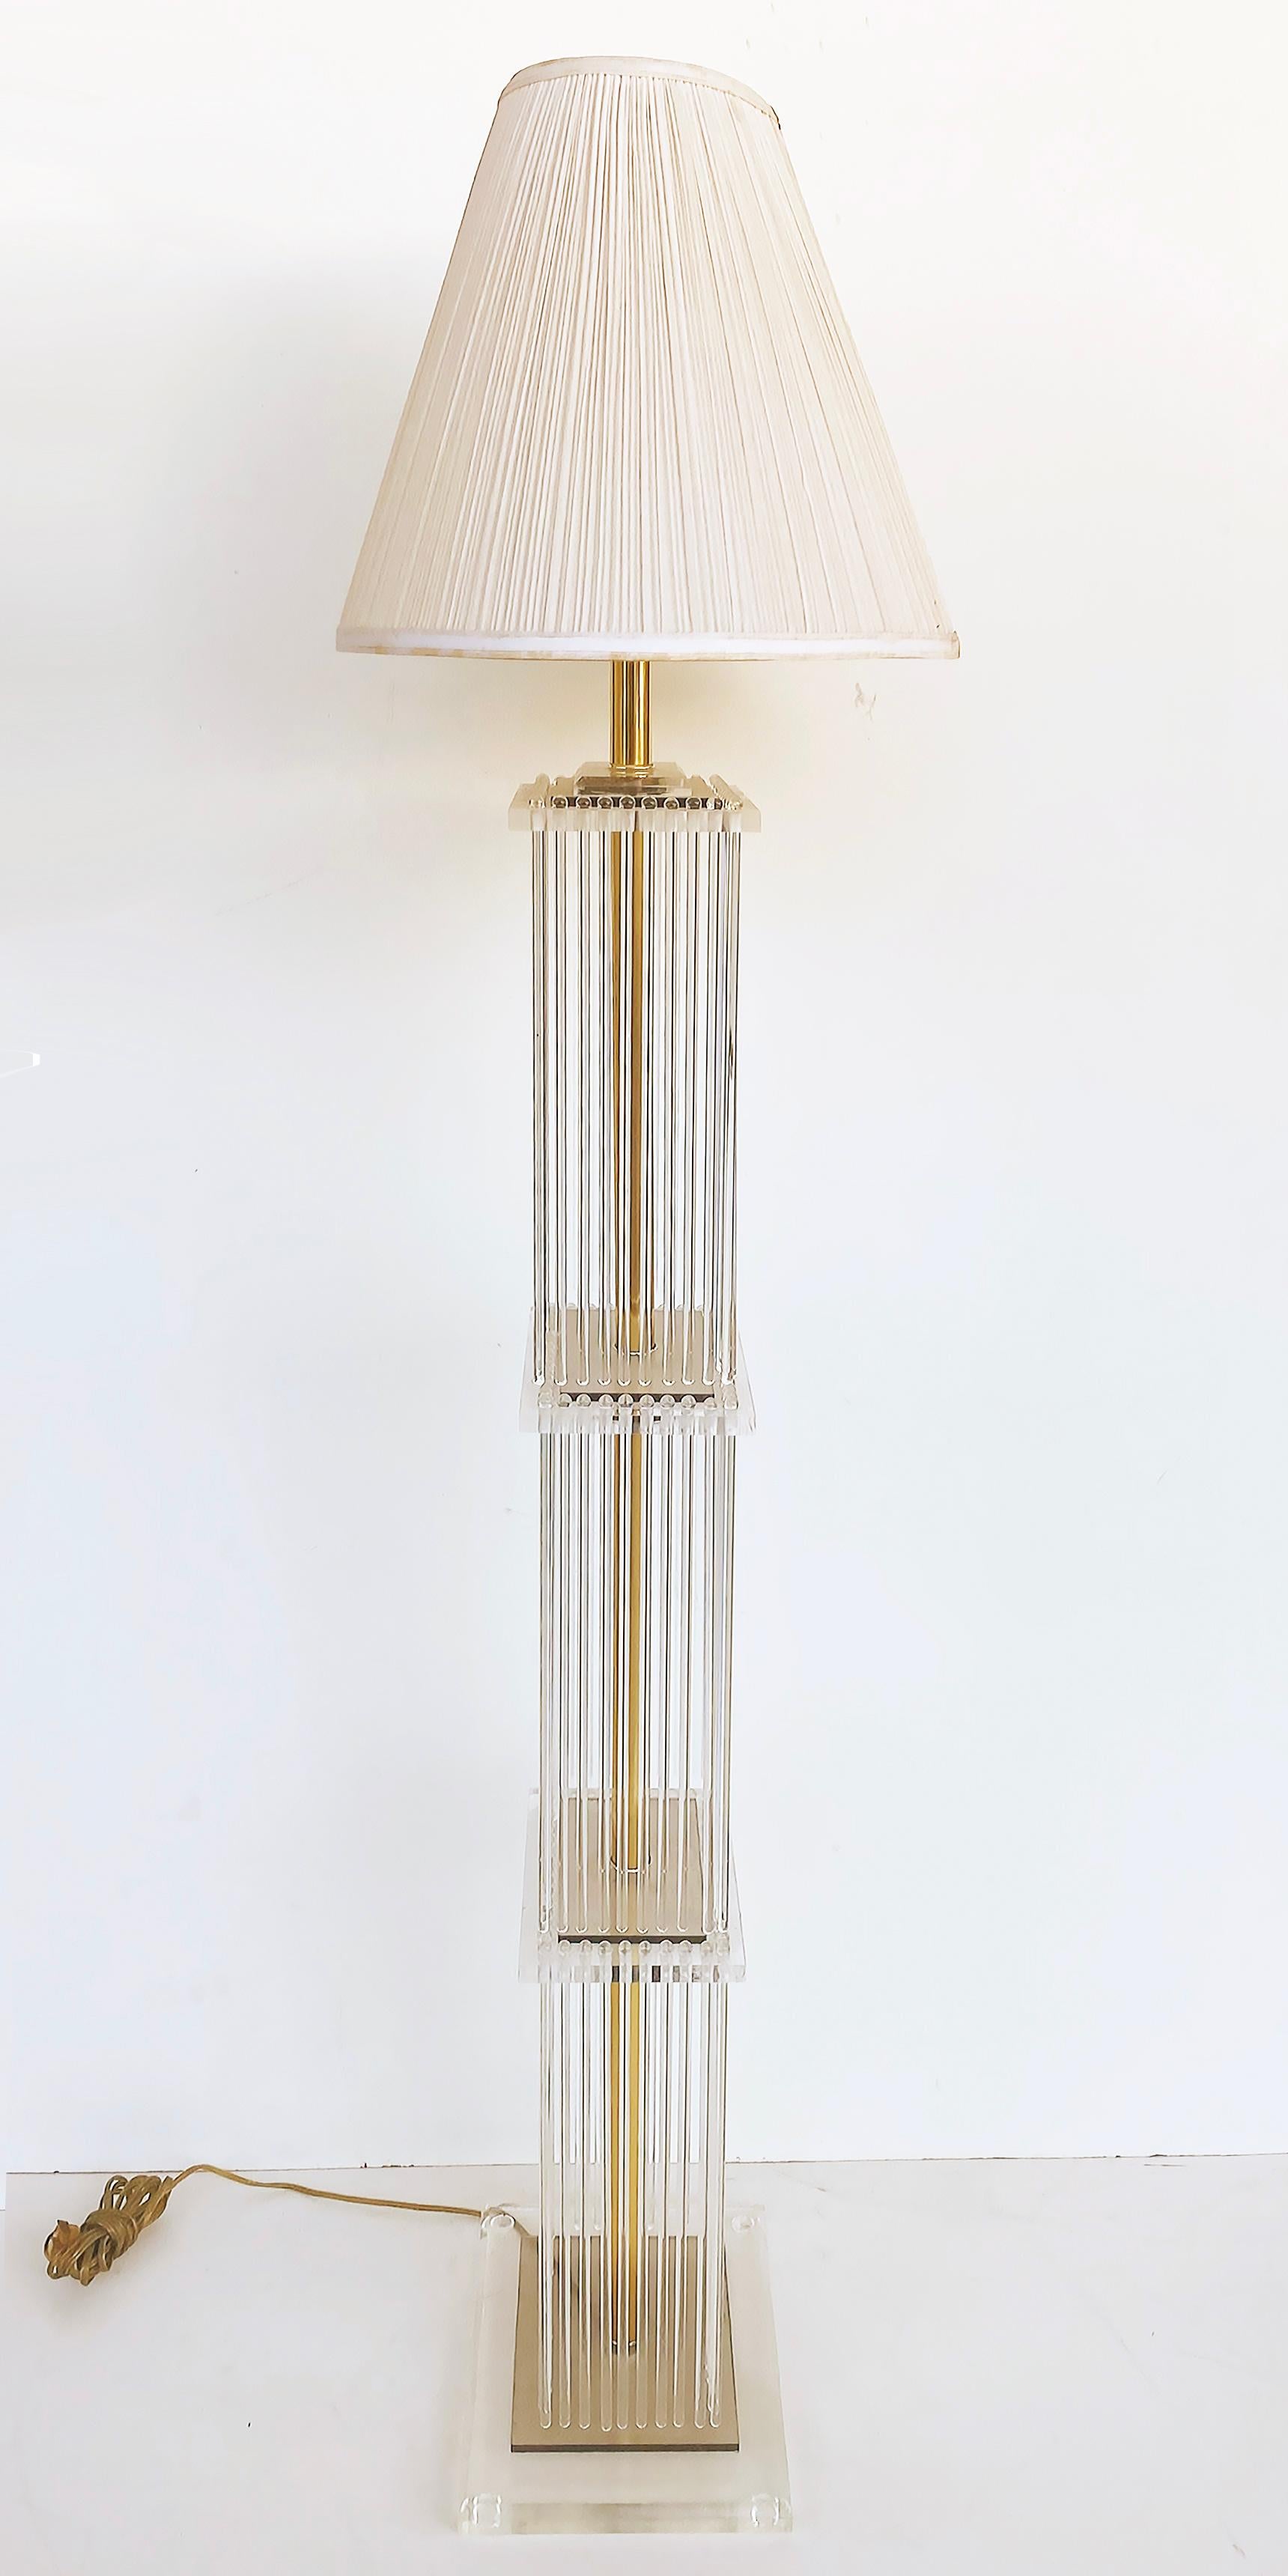 Brass and Glass Rod Floor Lamp, Gaetano Sciolari Lightolier Attributed 

Offered for sale is a brass and glass rod floor lamp attributed to Gaetano Sciolari for Lightolier.  This wonderful floor lamp is wired and in working condition.  It includes